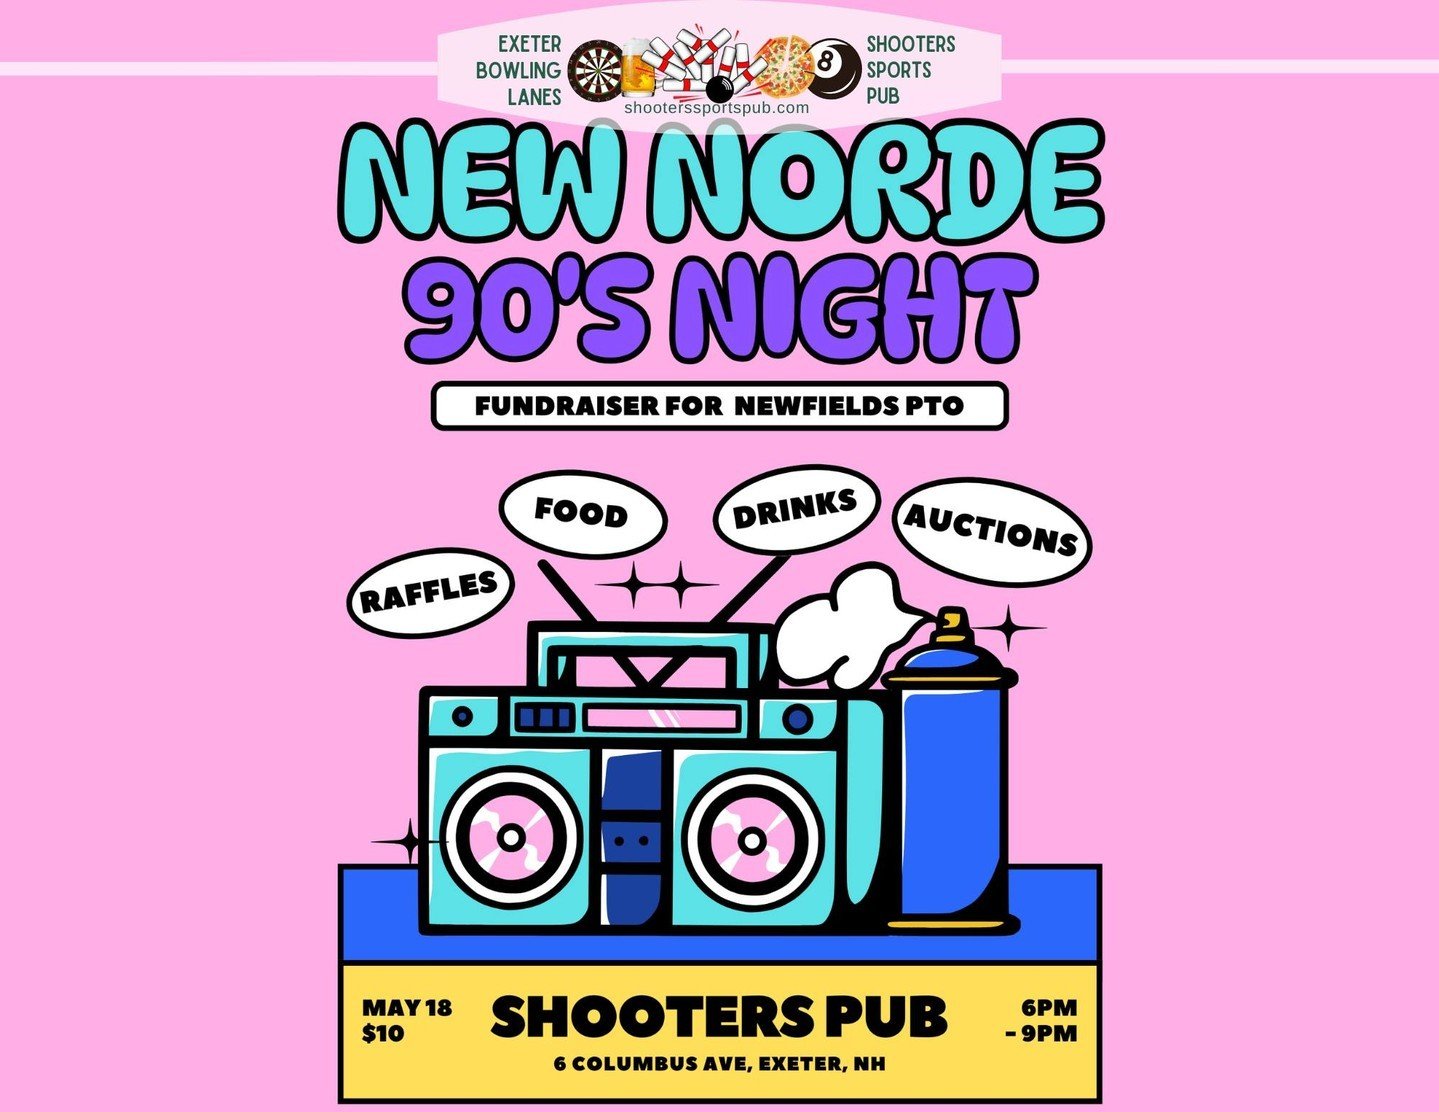 Get ready to party like it's the '90s, because the Newfields PTO is bringing the nostalgia to Shooters Pub! 🎉 ⁠
⁠
Join them on May 18th from 6 pm - 9 pm for an epic New Norde '90s Night. ⁠
⁠
Dust off your flannel shirts, grab your scrunchies, and le